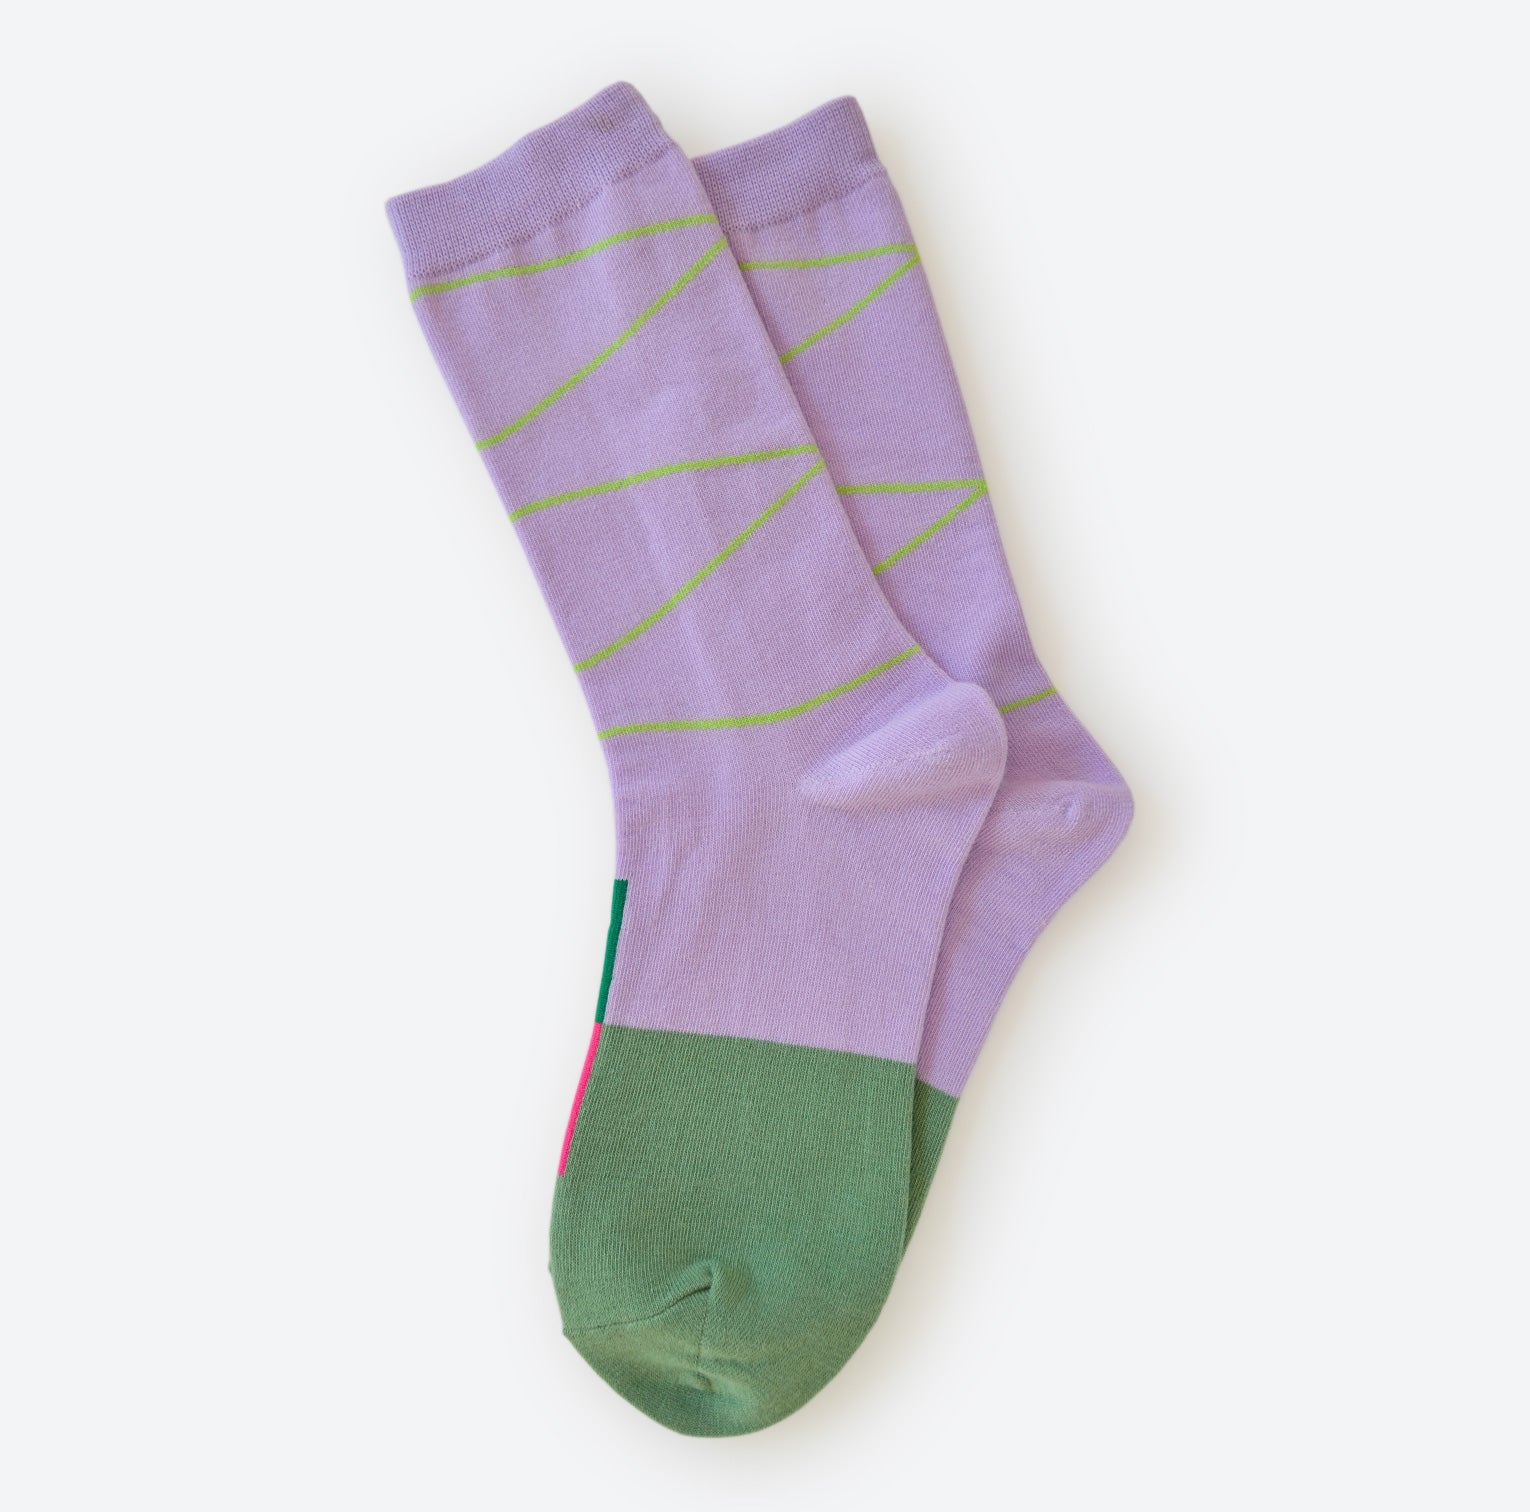 Hooray Sock Co.&#39;s Hyde Crew Socks: Style soaring with vibrant purple and green pop. Luxe comfort, crew length. 80% cotton, 20% spandex. Made in South Korea. Unisex. Small (Women&#39;s 4-10).